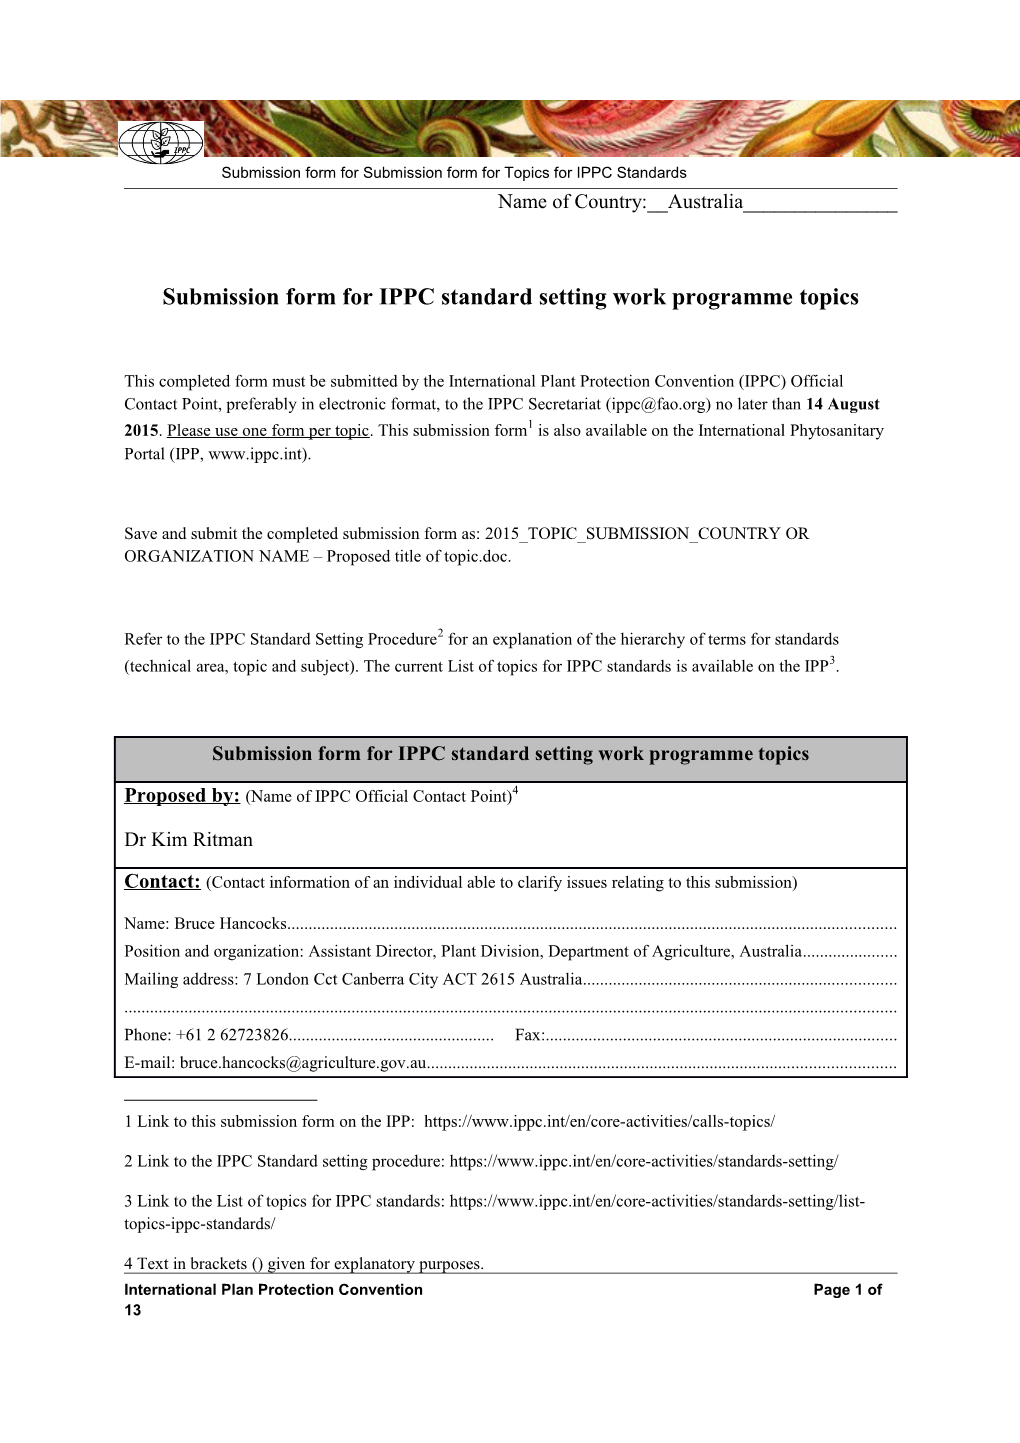 Submission Form for Topics for IPPC Standards